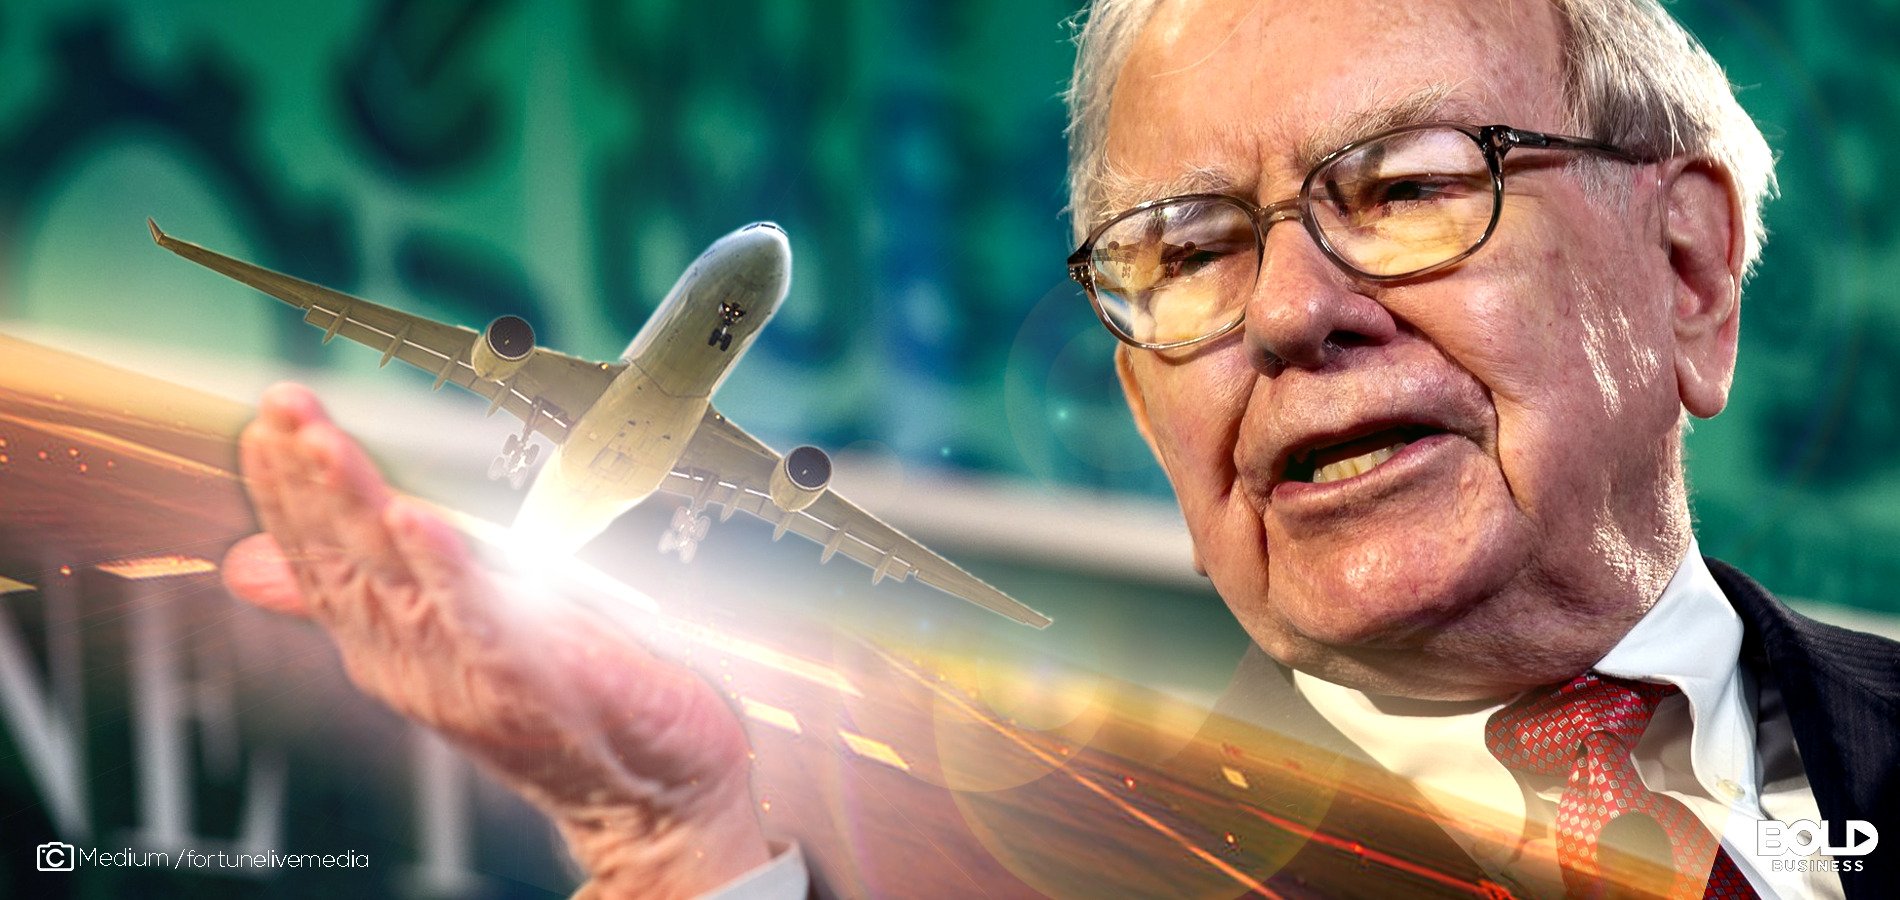 The Warren Buffett Investment Strategy And Speculations of Buffett Eyeing a Big Purchase